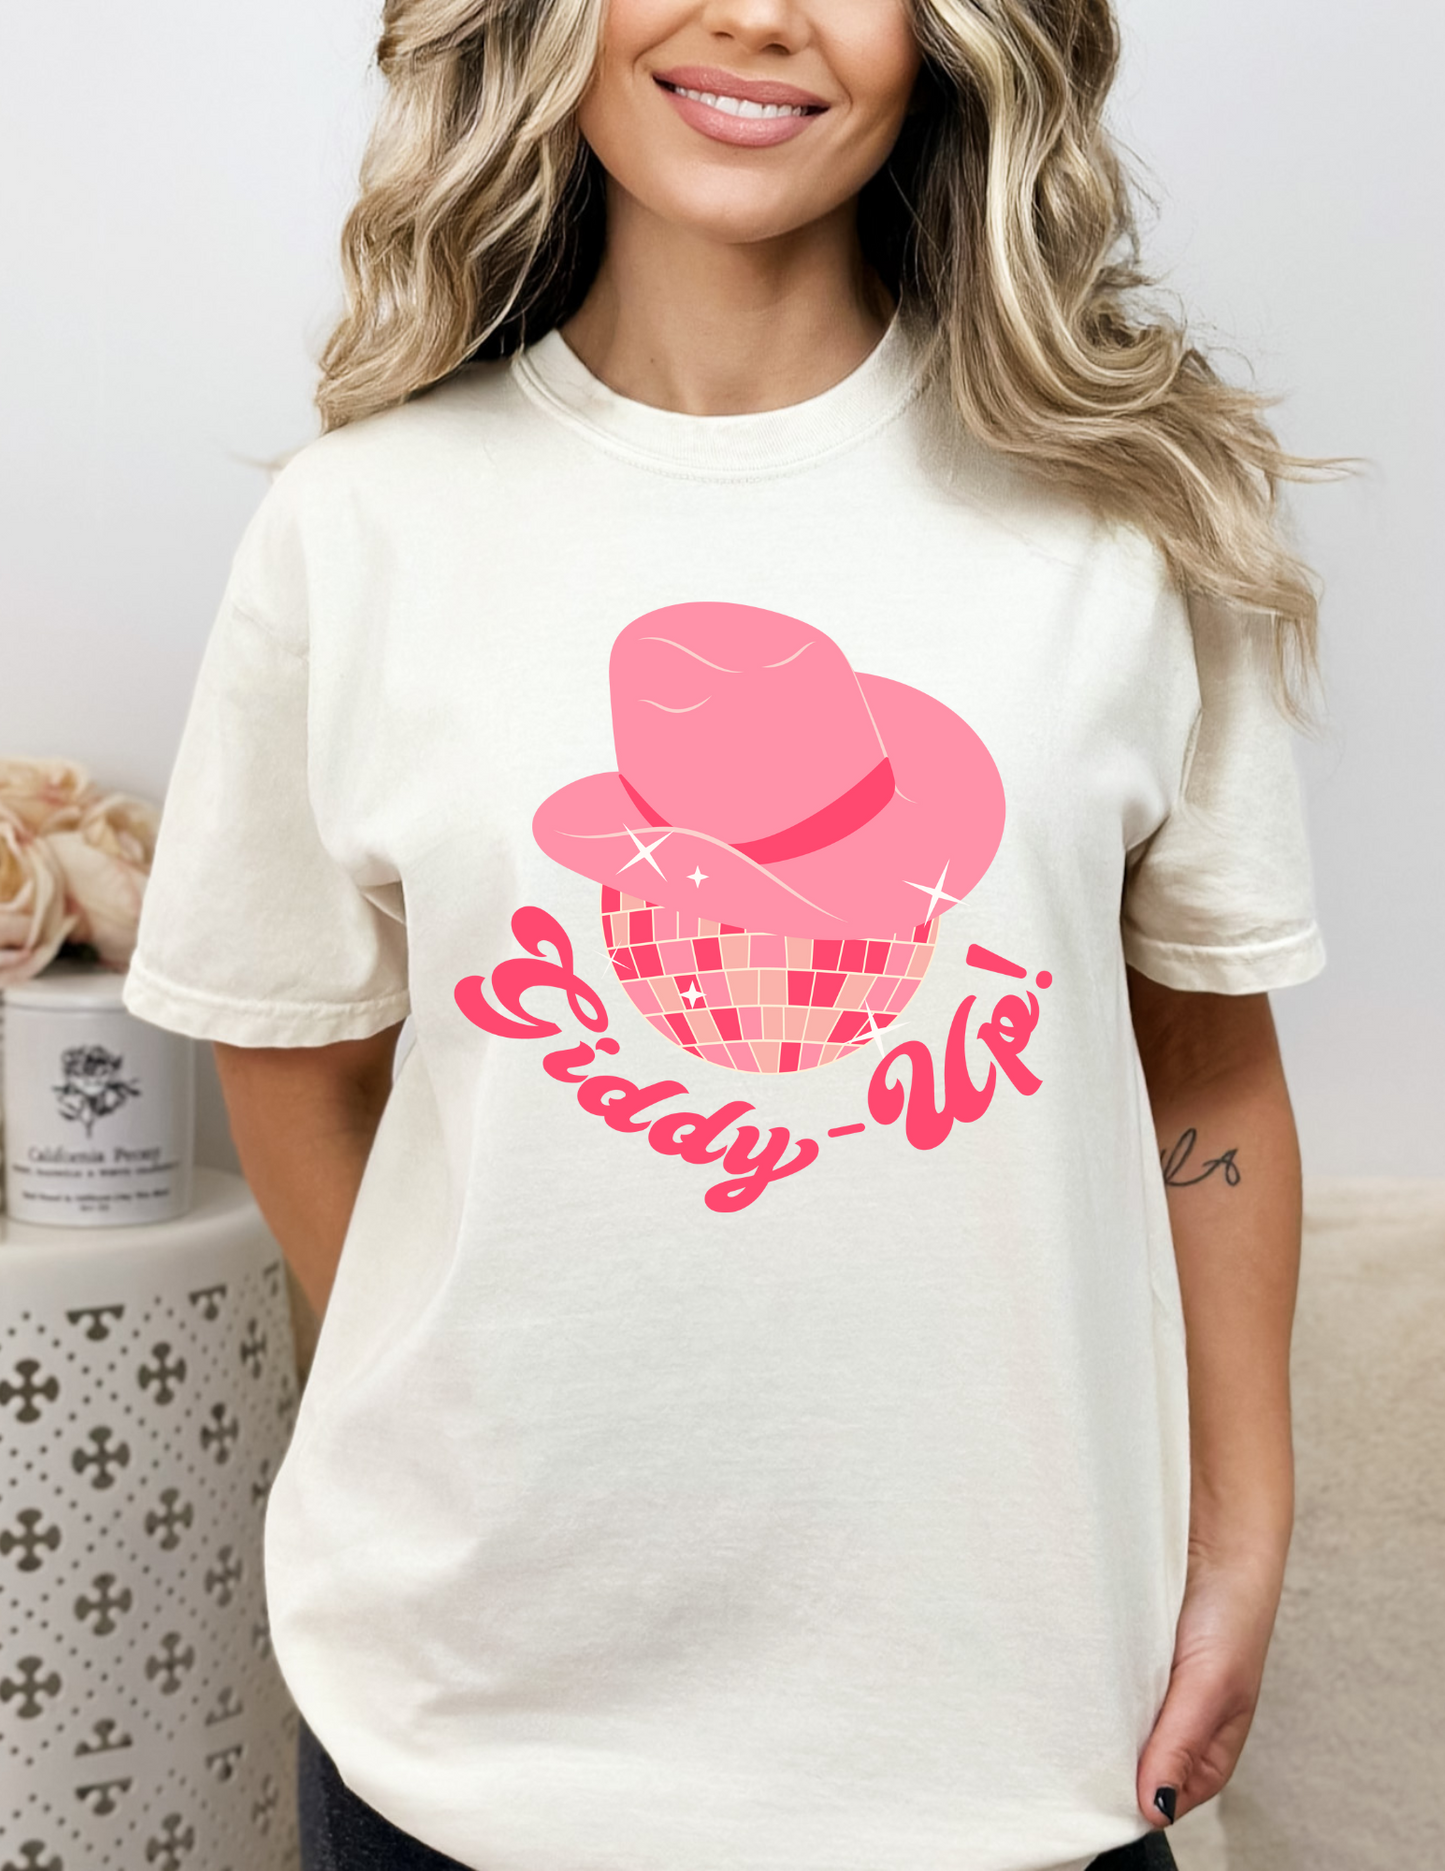 “Giddy Up" Graphic Tee